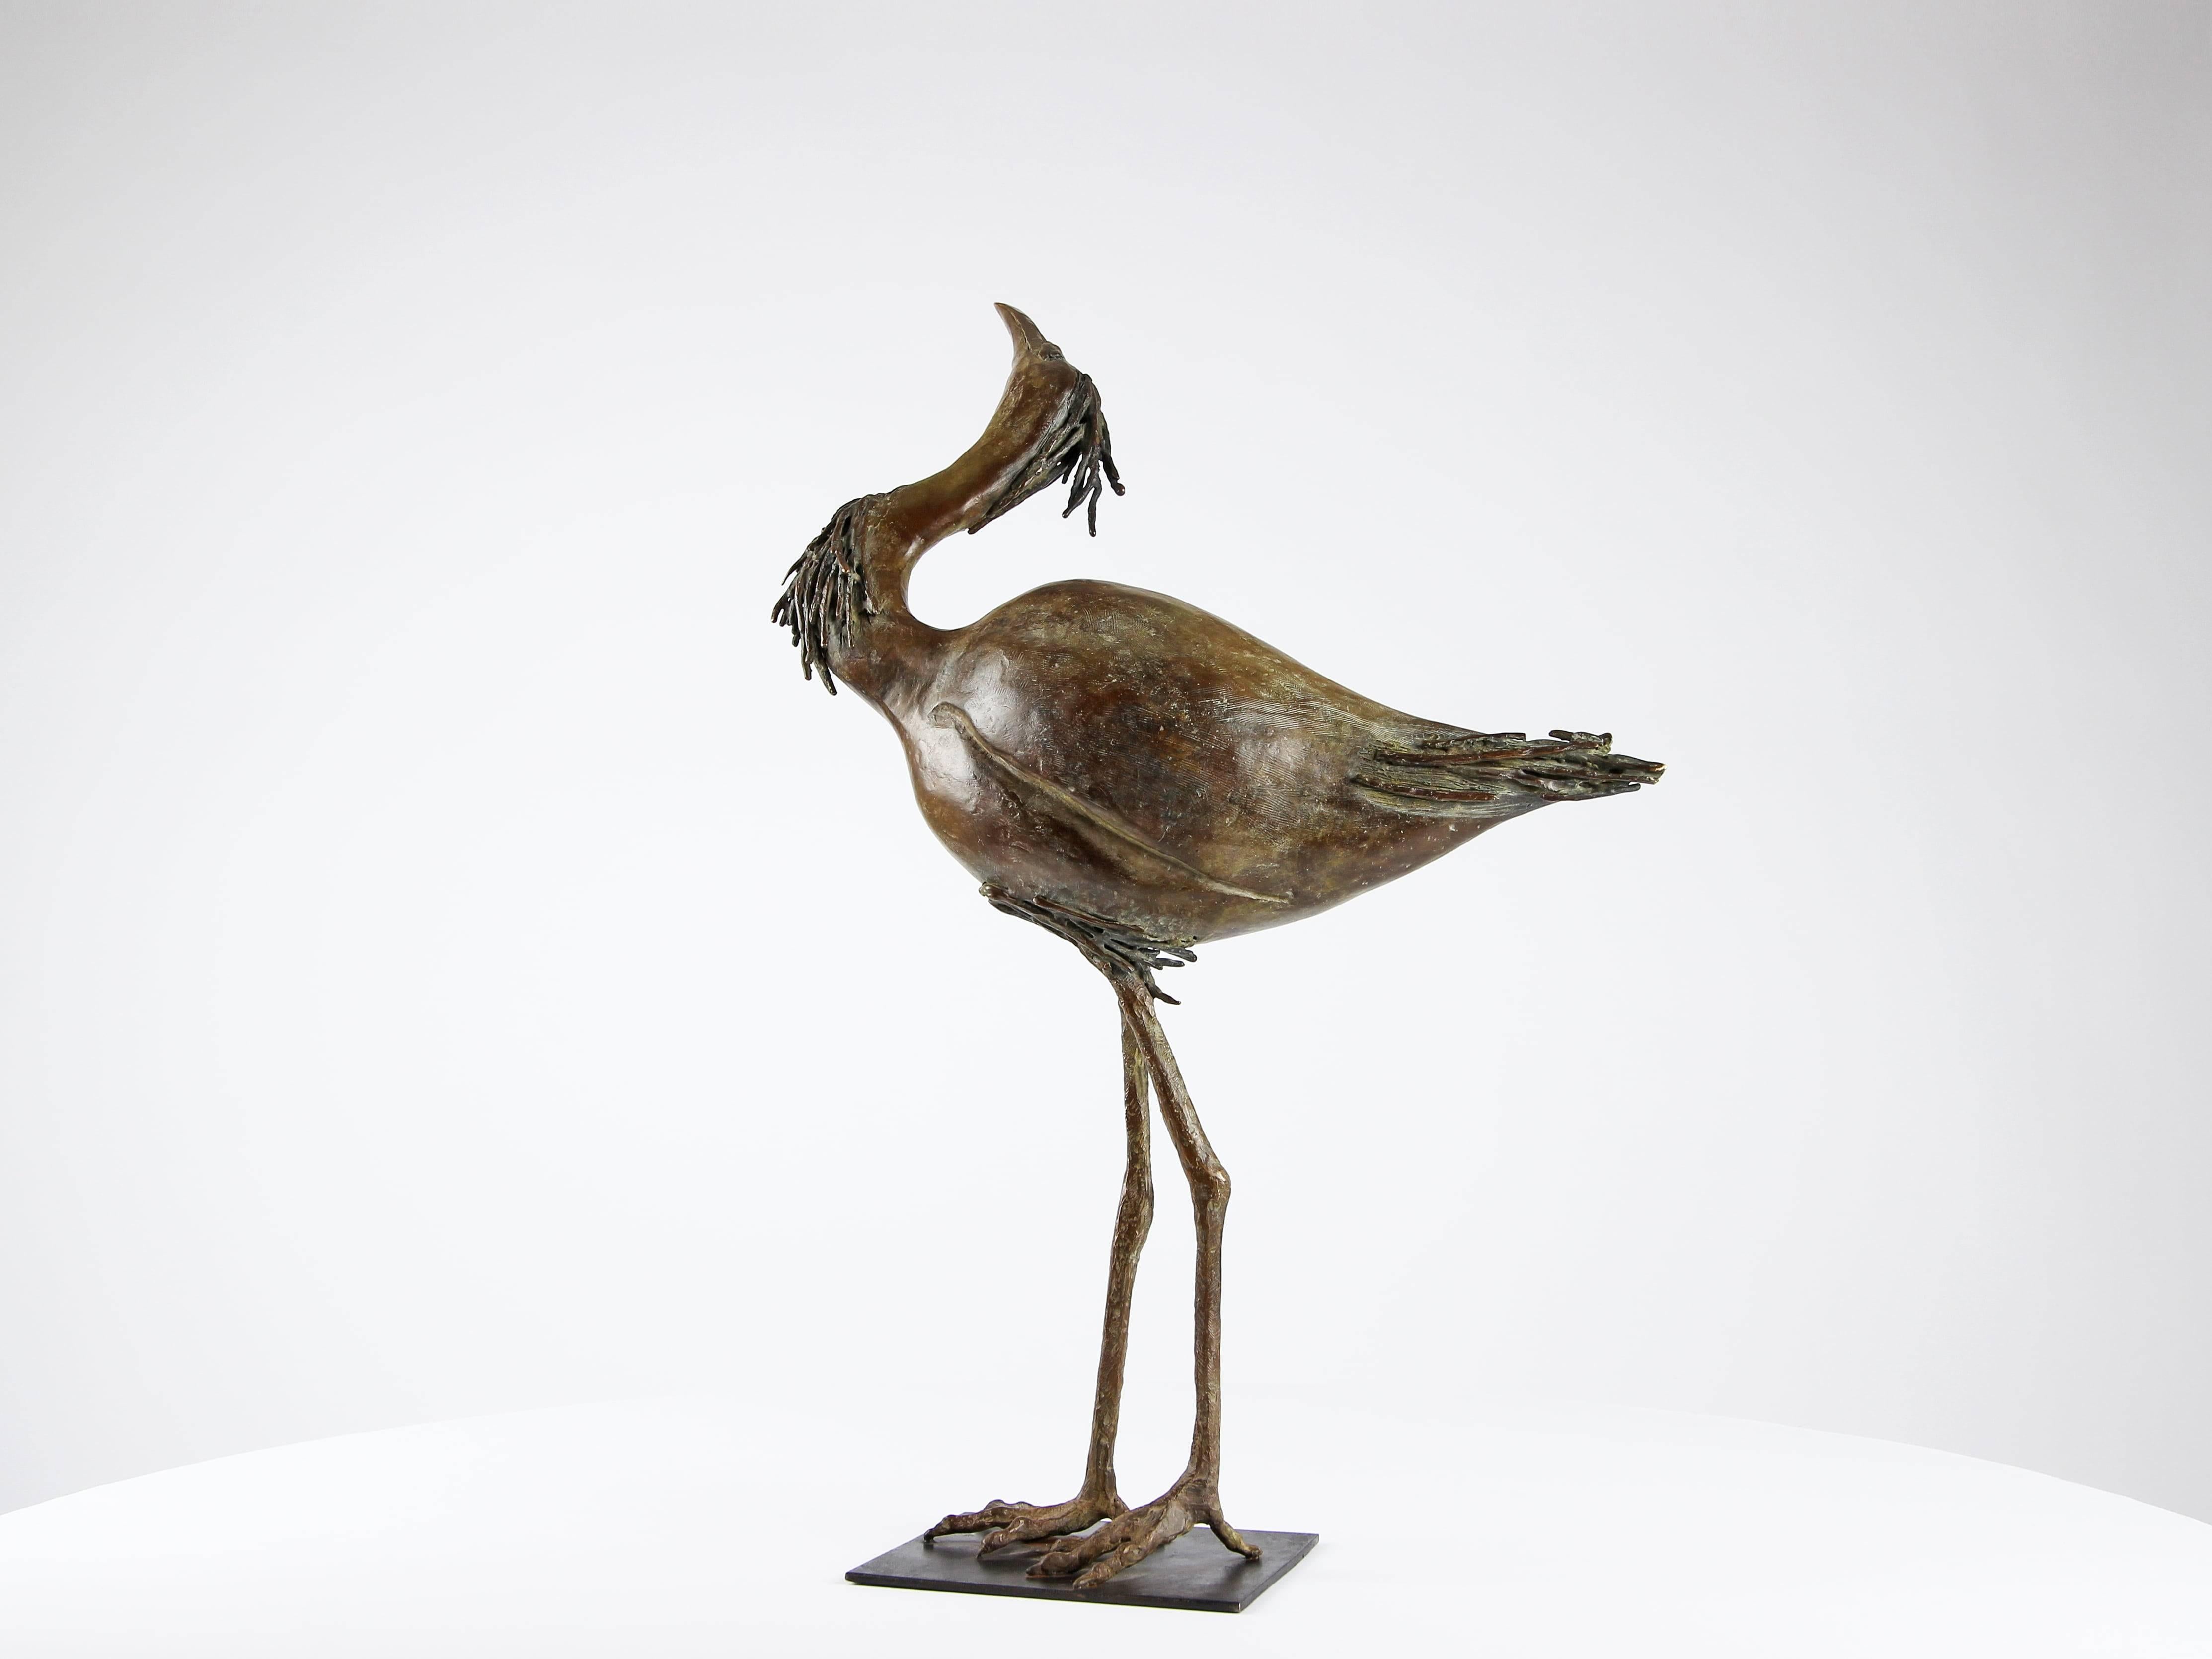 Egret by Chésade - Bronze animal sculpture of a bird, realistic, expressive For Sale 3